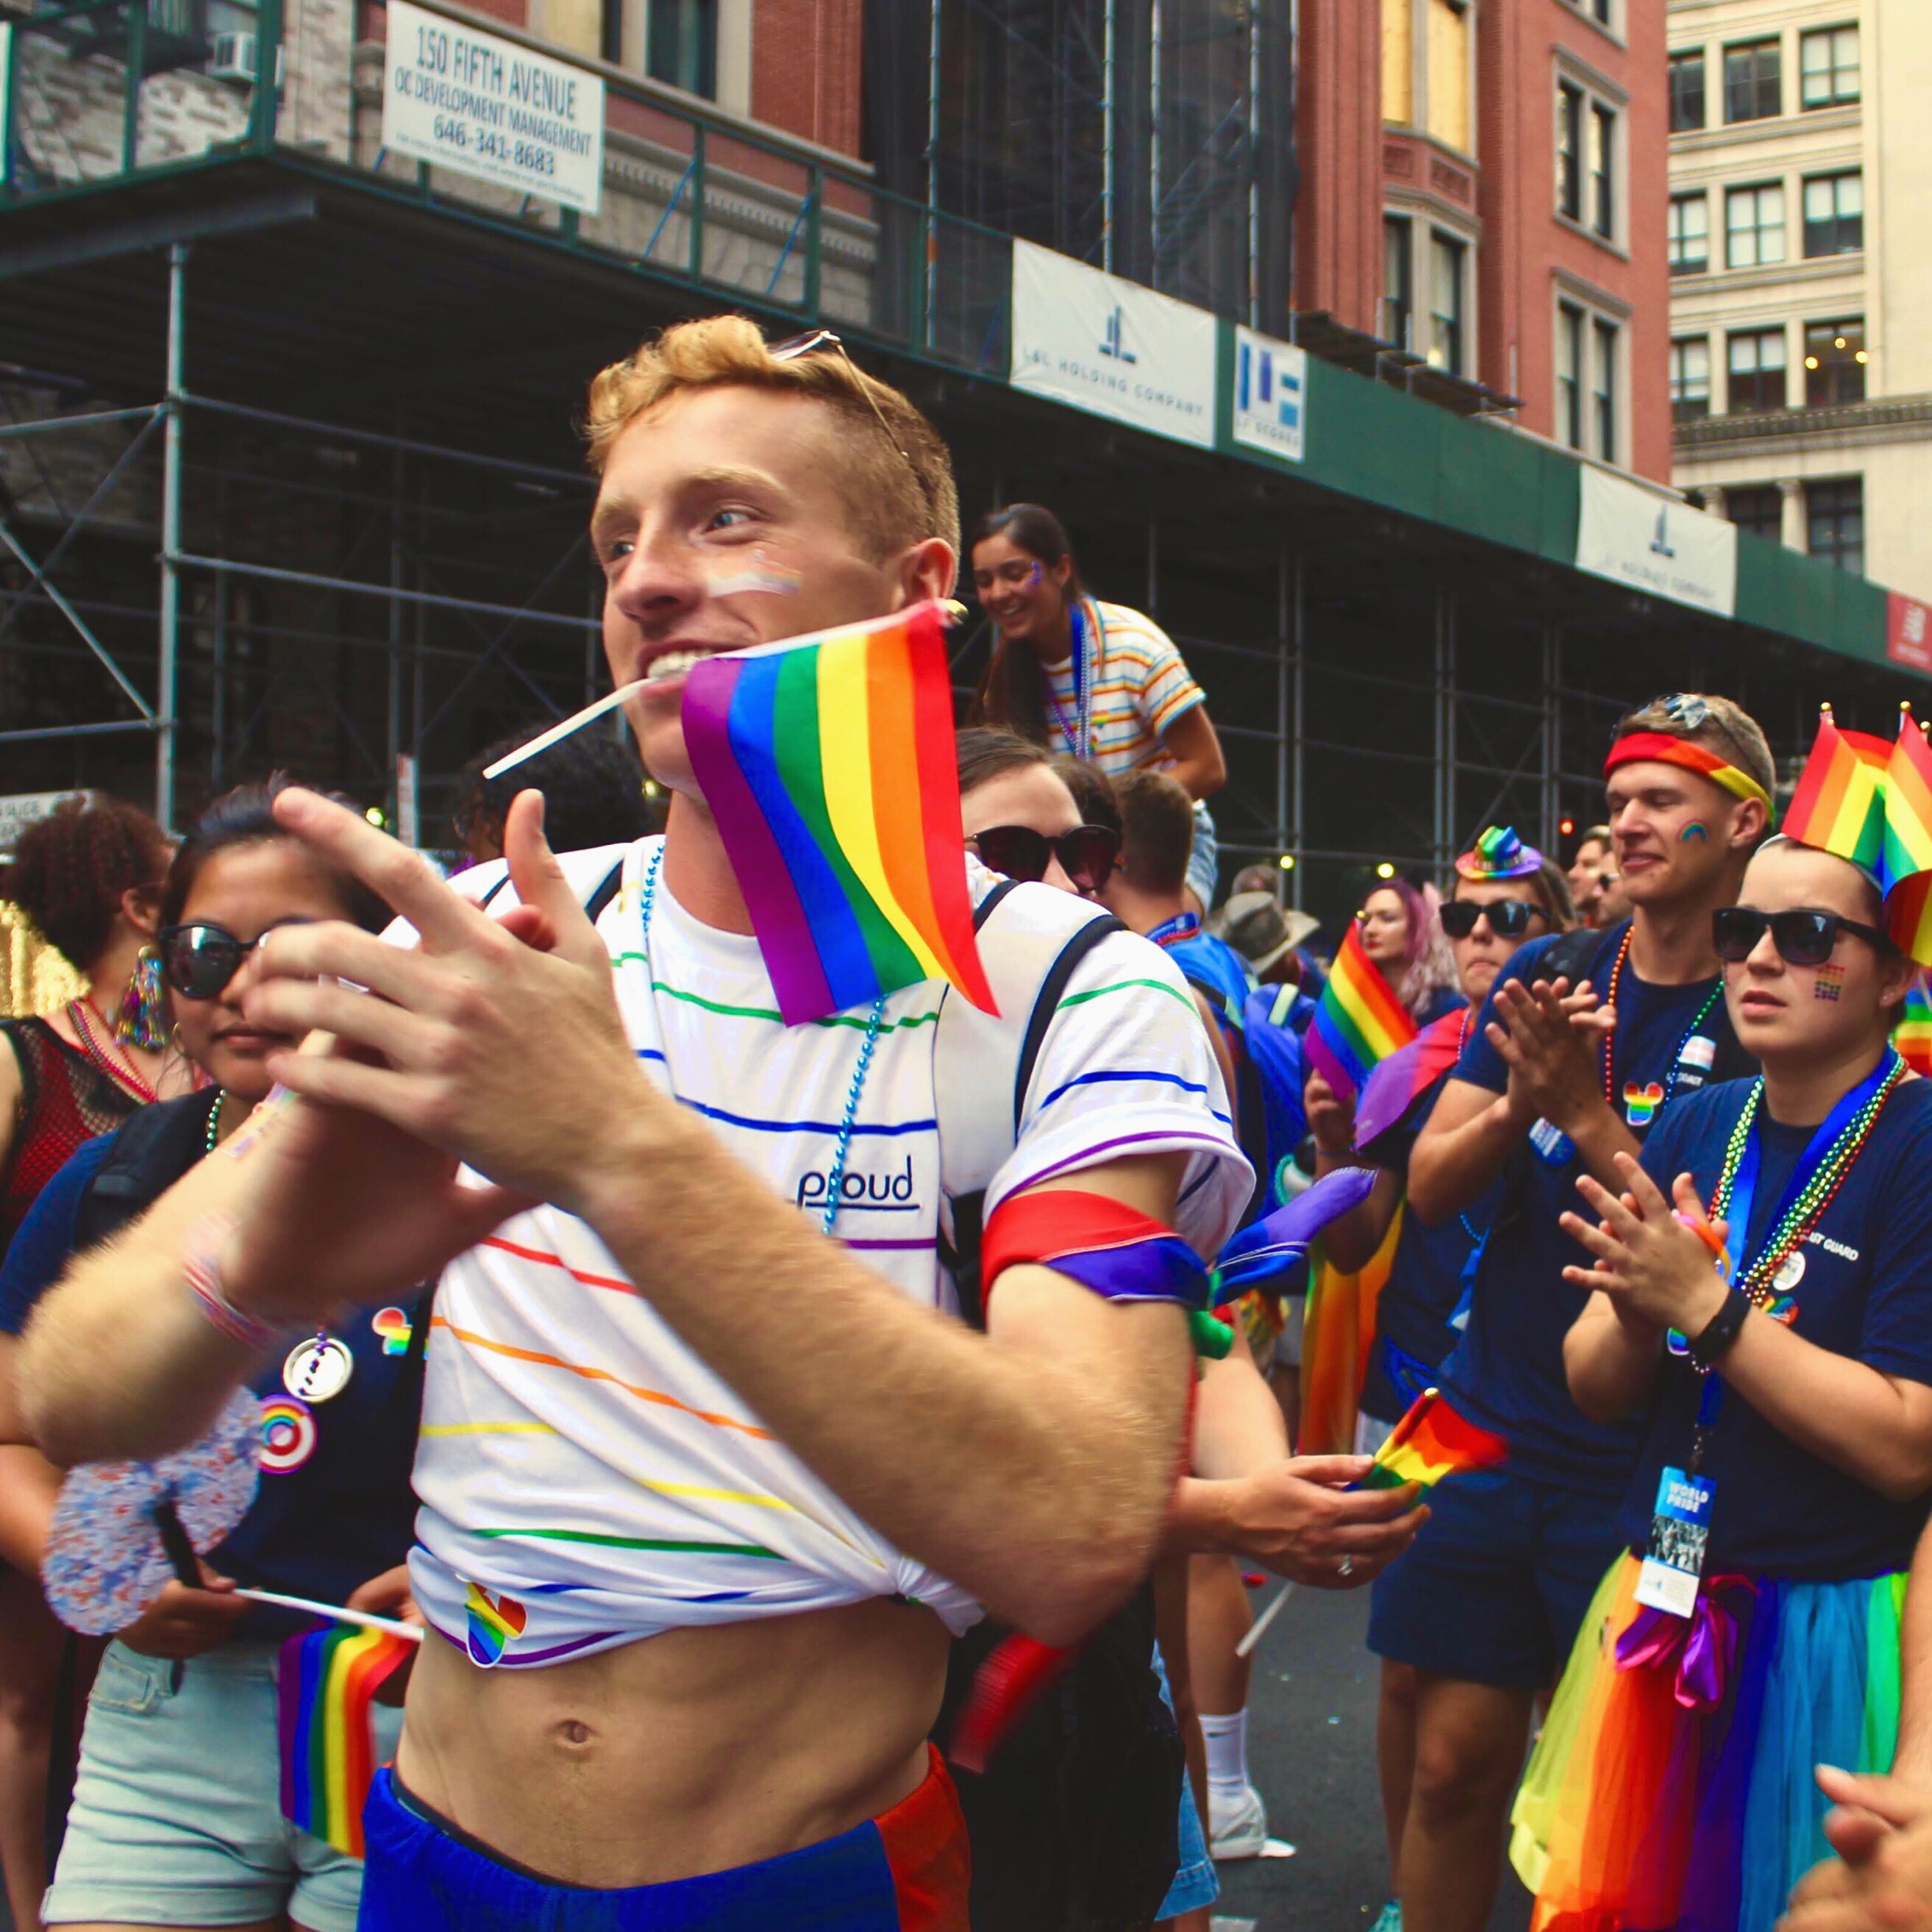 Josiah Davis marches with the Coast Guard contingent at World Pride in New York in 2019.